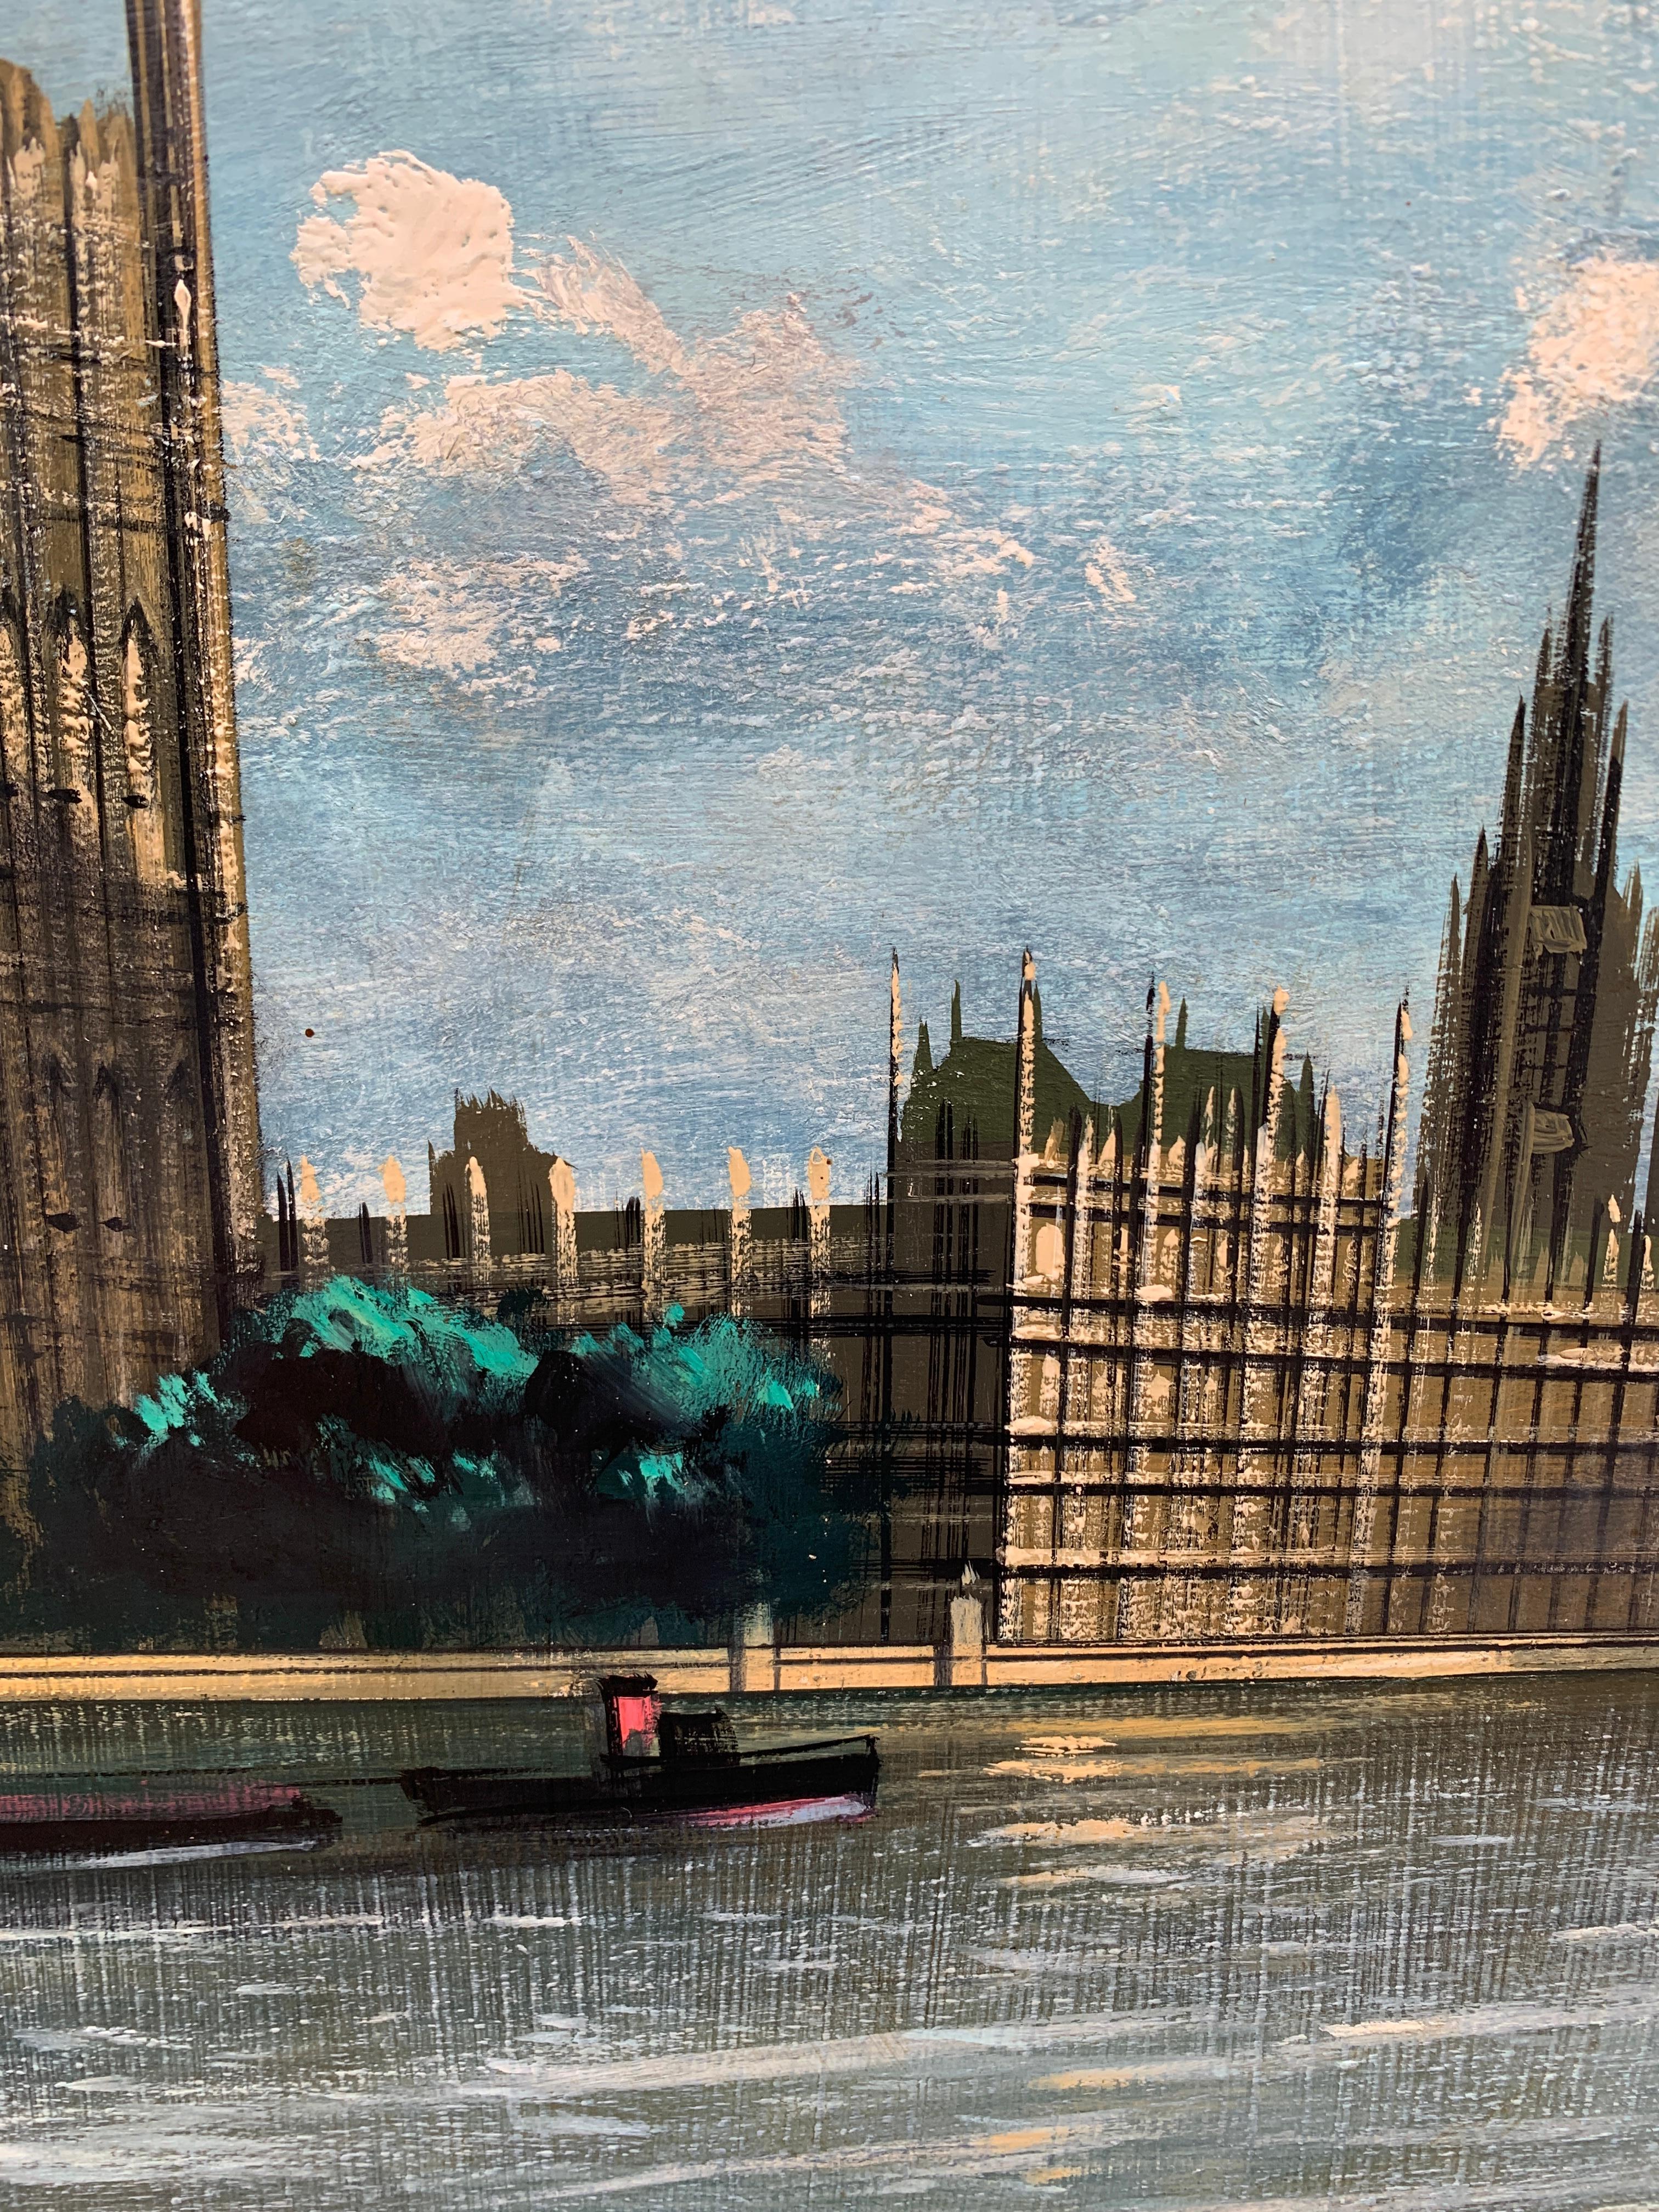 Interesting and well-painted view of the Thames in London with the Palace of Westminster, Ben Ben, and Westminster Bridge.

This piece is framed in its original frame and is ready to hang.